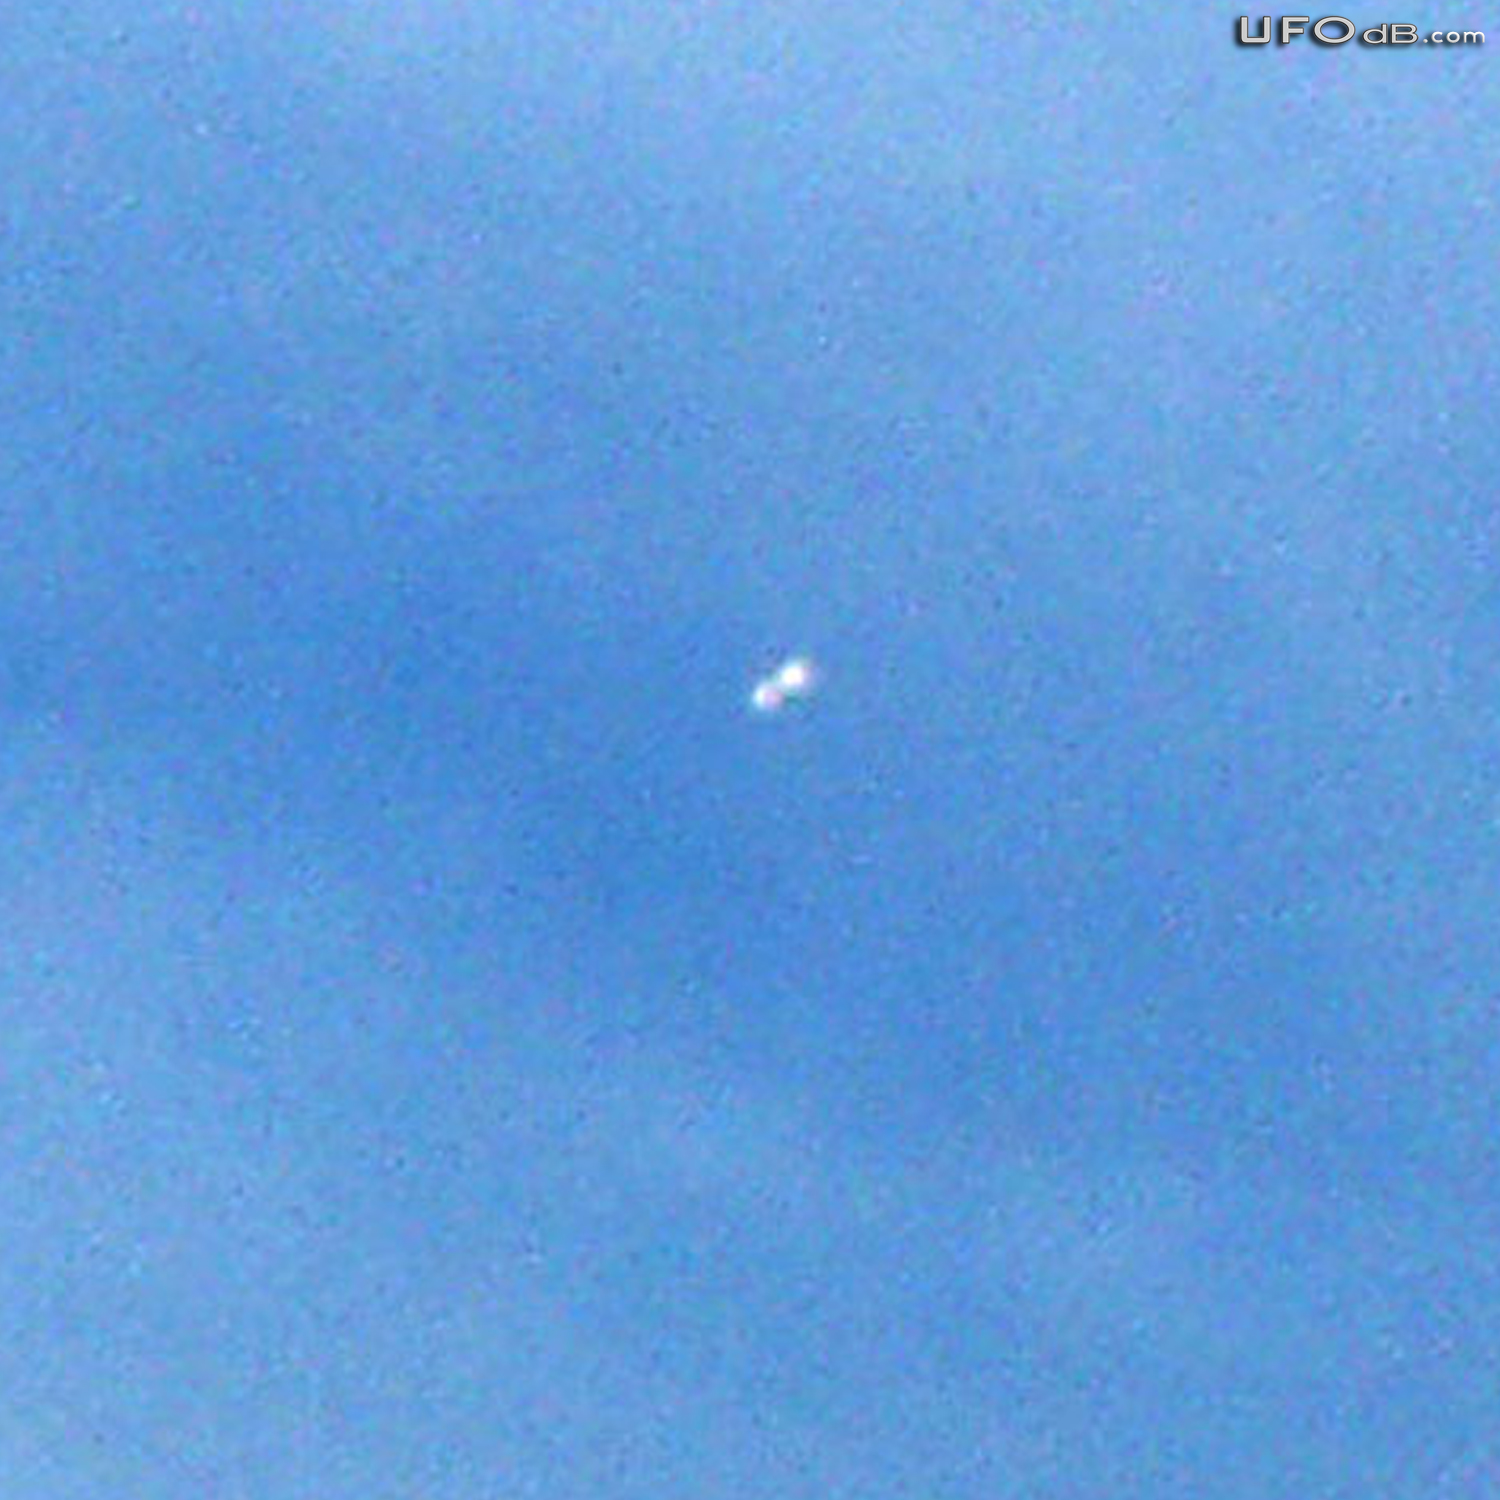 Kids run into the house after UFO sighting | Littleton USA April 2011 UFO Picture #274-2